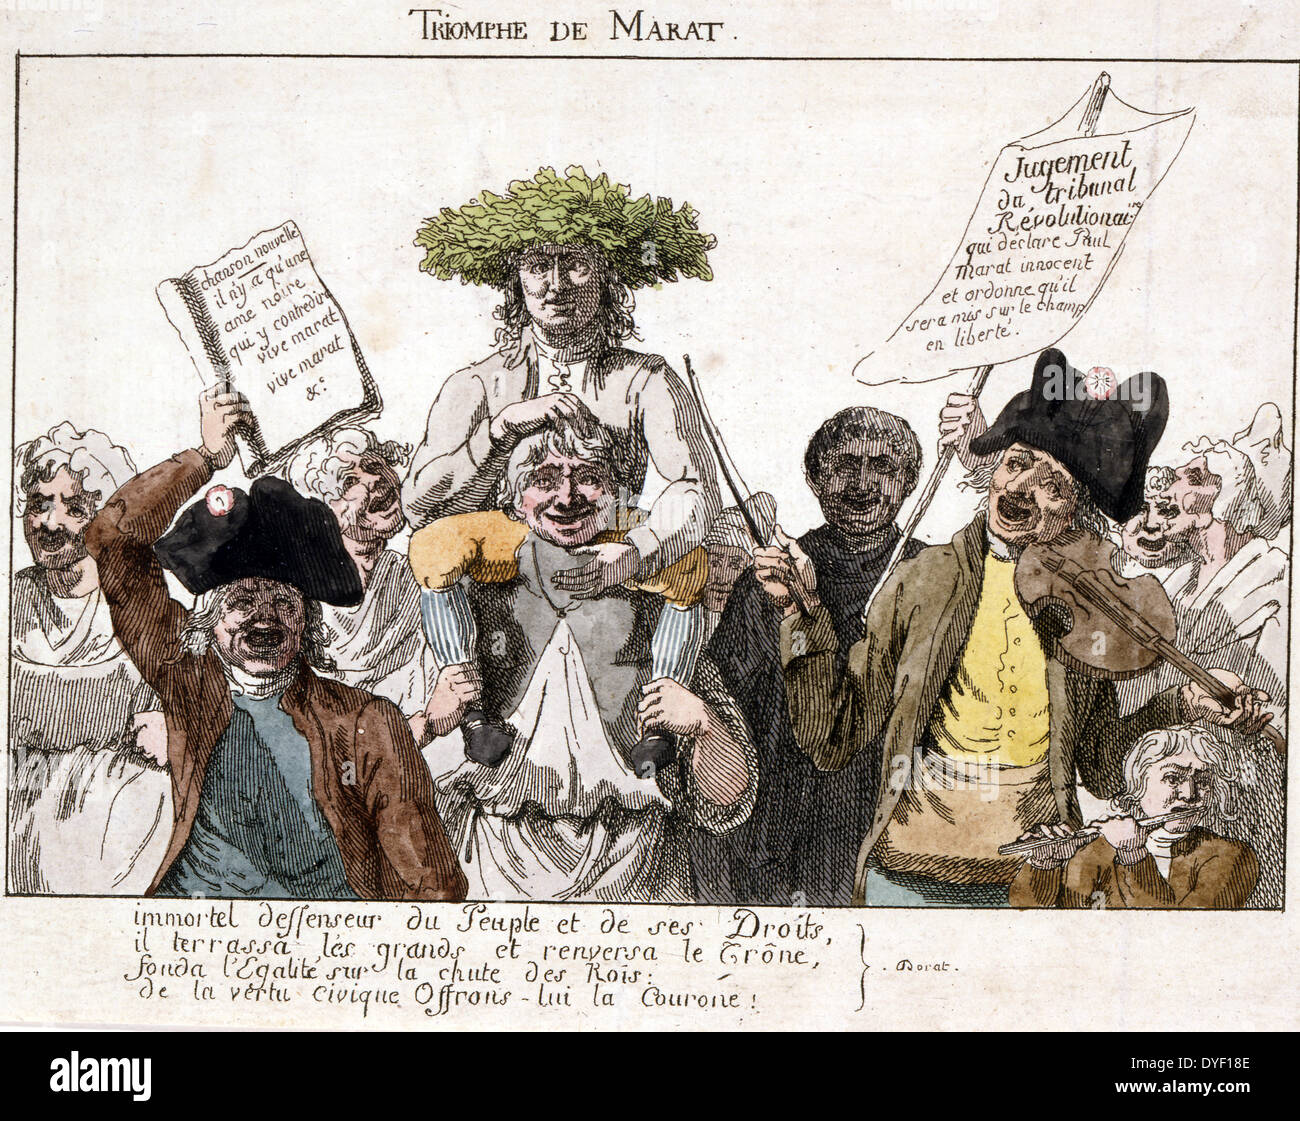 Triomphe de Marat : [1793] etching, with watercolour. Jean Paul Marat with crown of laurel leaves carried on shoulders of man around whom others are crowded; celebrating his acquittal by Revolutionary Tribunal. French political cartoon Stock Photo